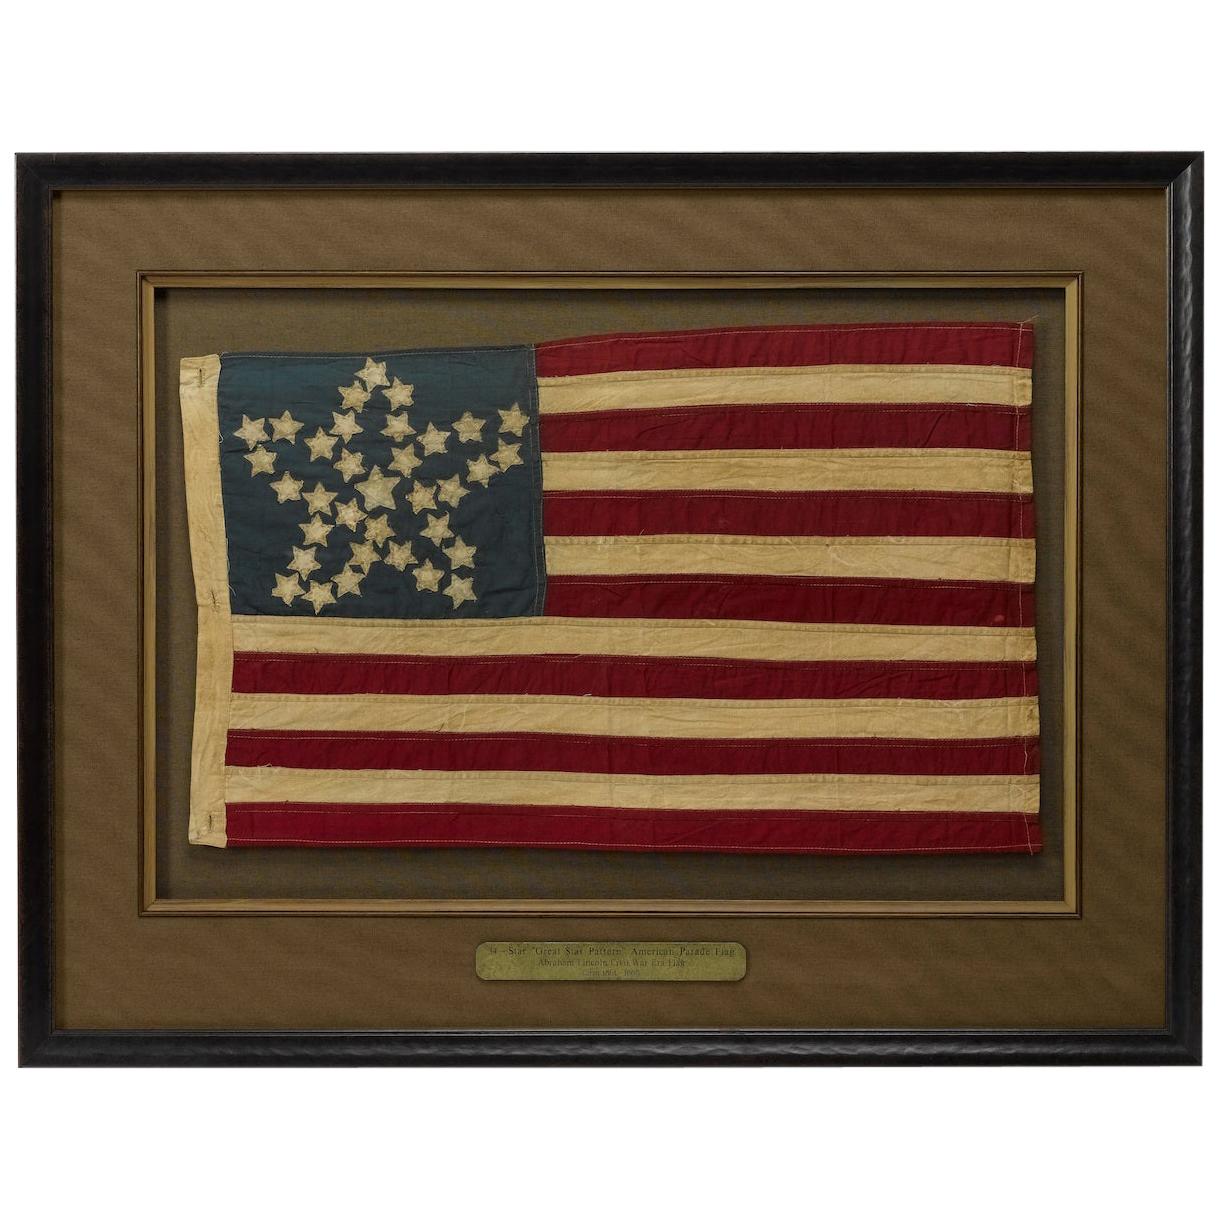 20th Century Commemorative 34-Star American Flag with "Great Star" Pattern